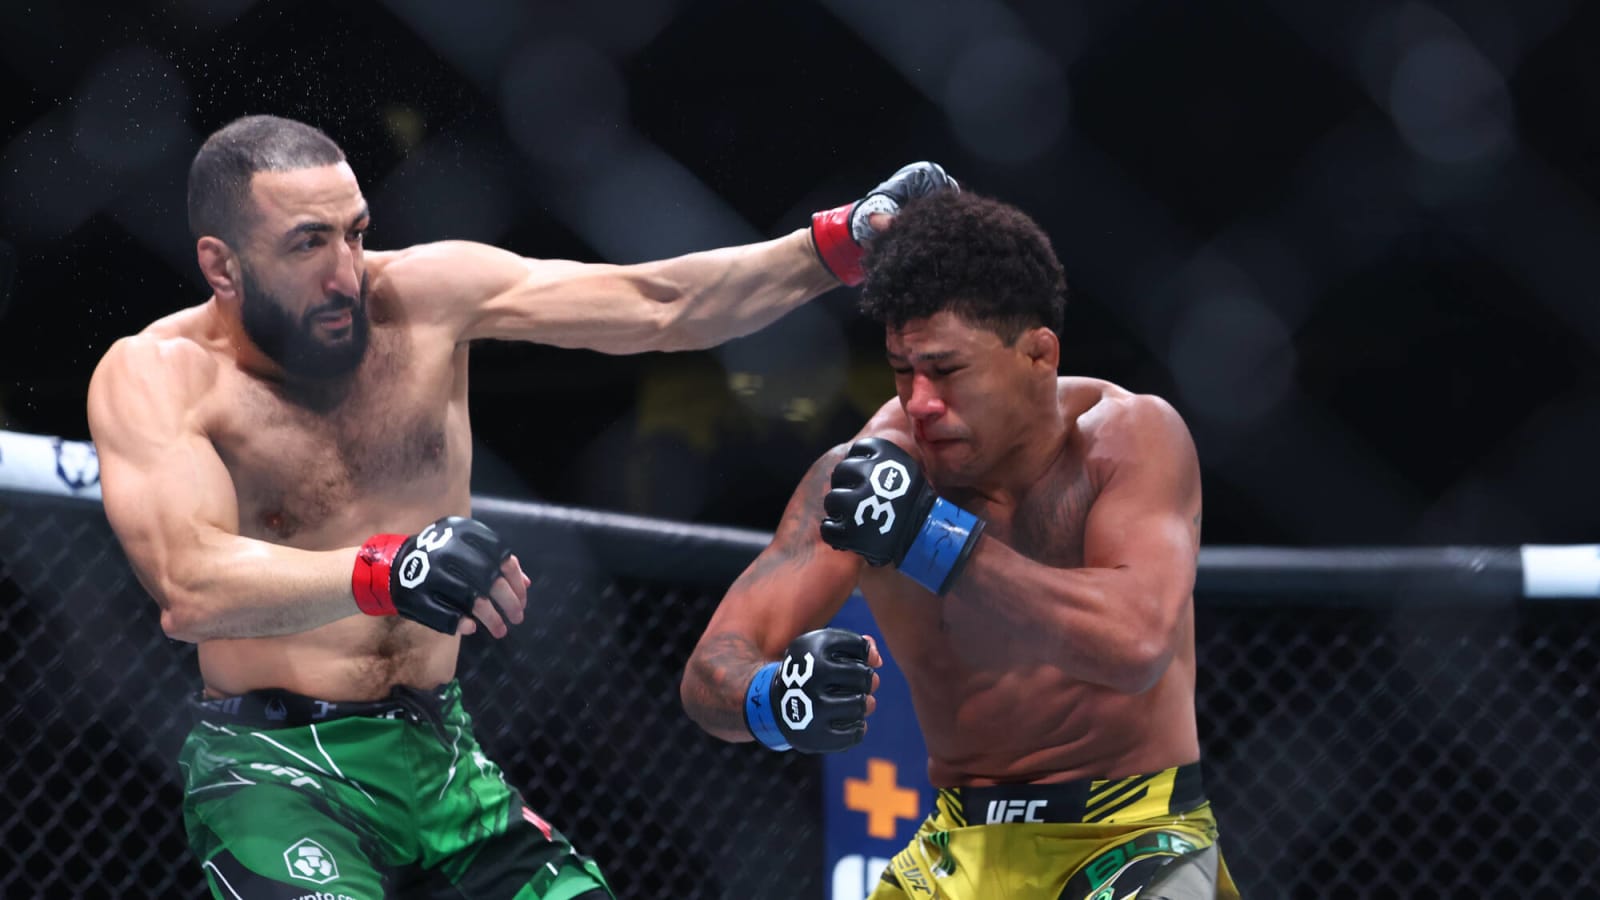 Did Belal Muhammad earn his title shot at UFC 288?